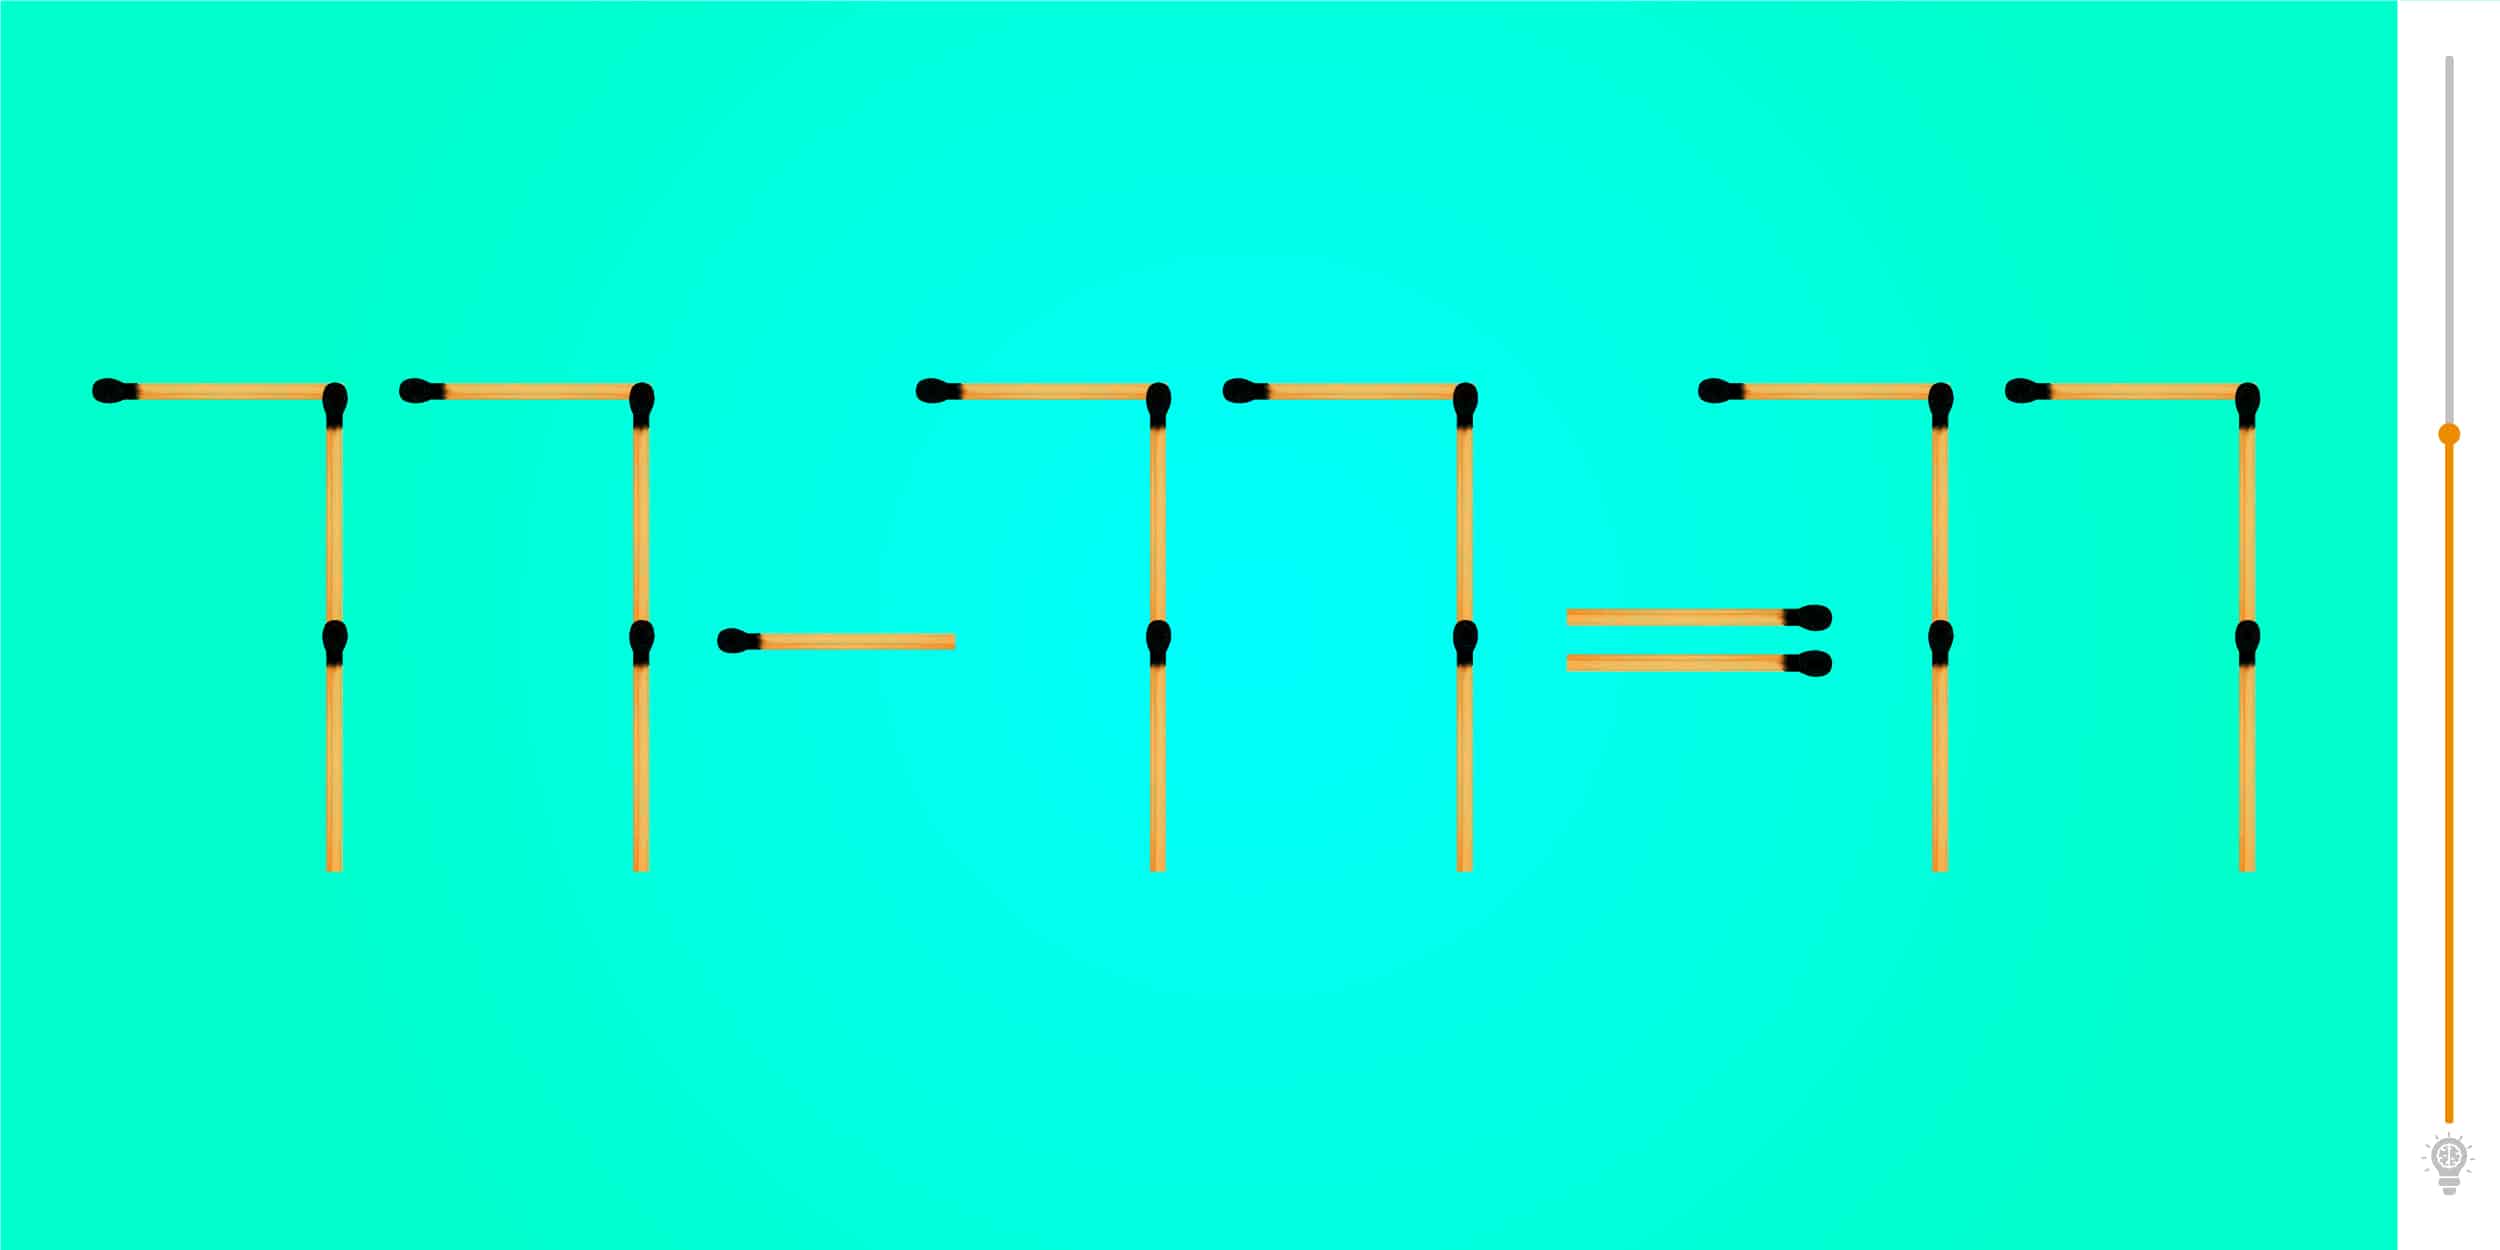 Can You Solve 77 - 77 = 77 Puzzle? Move 2 Matchsticks! 3